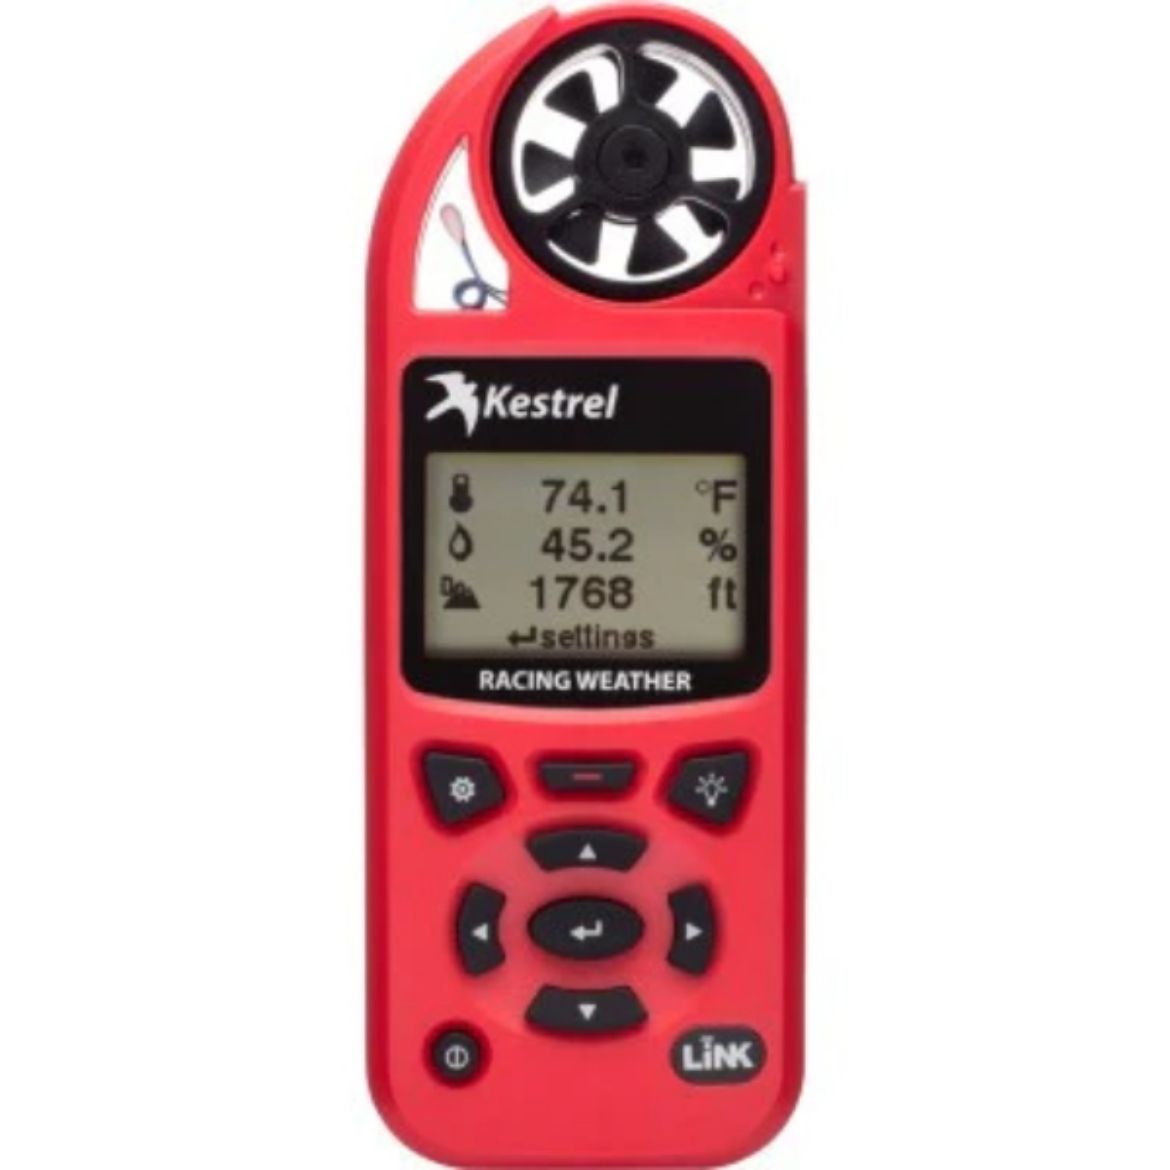 Picture of KESTREL 5100 RACING WEATHER METER WITH LINK - RED